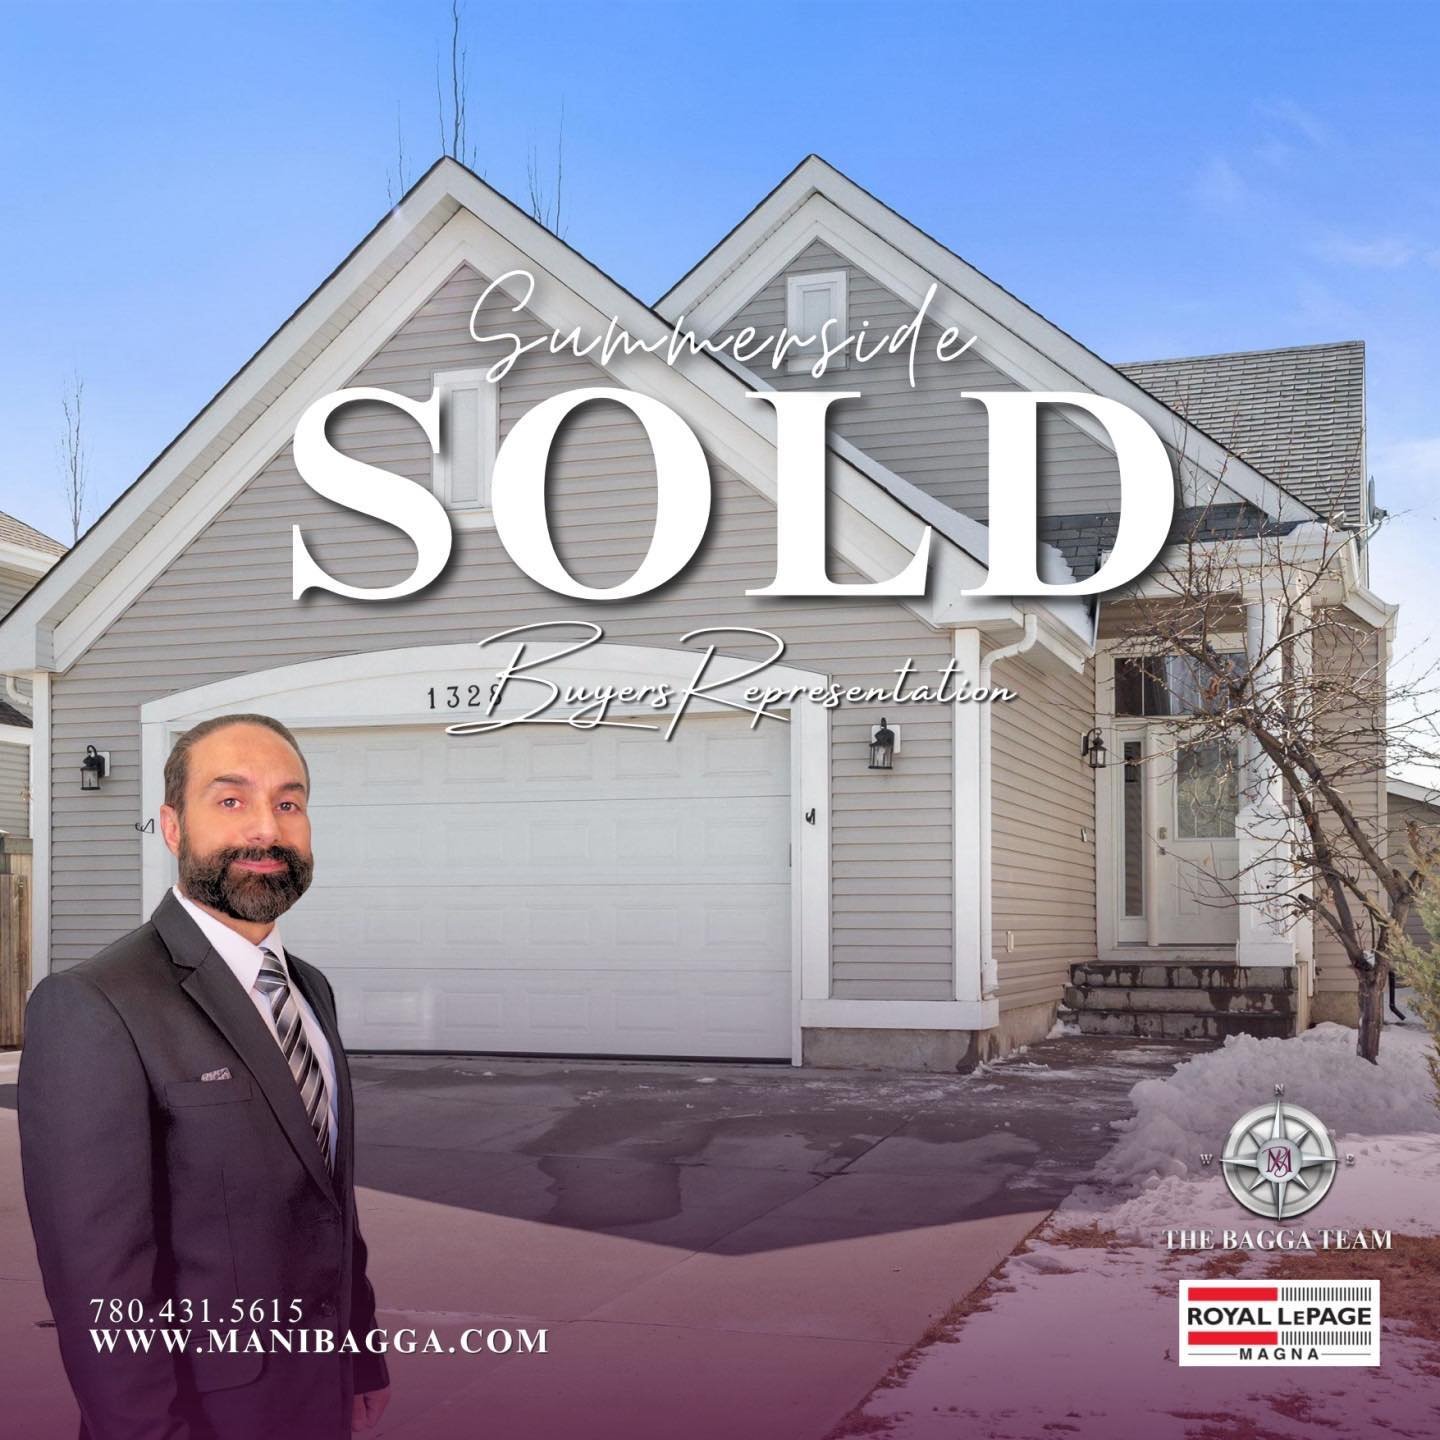 🏡✨ Big Congratulations to my clients ! 🎉 🎉 

I am thrilled to have helped you find the perfect place to create lifelong memories. 🥂 Your dream home is no longer just a dream! 🌟

🔍 Looking for your perfect home? 🏠 Let me help you turn your home